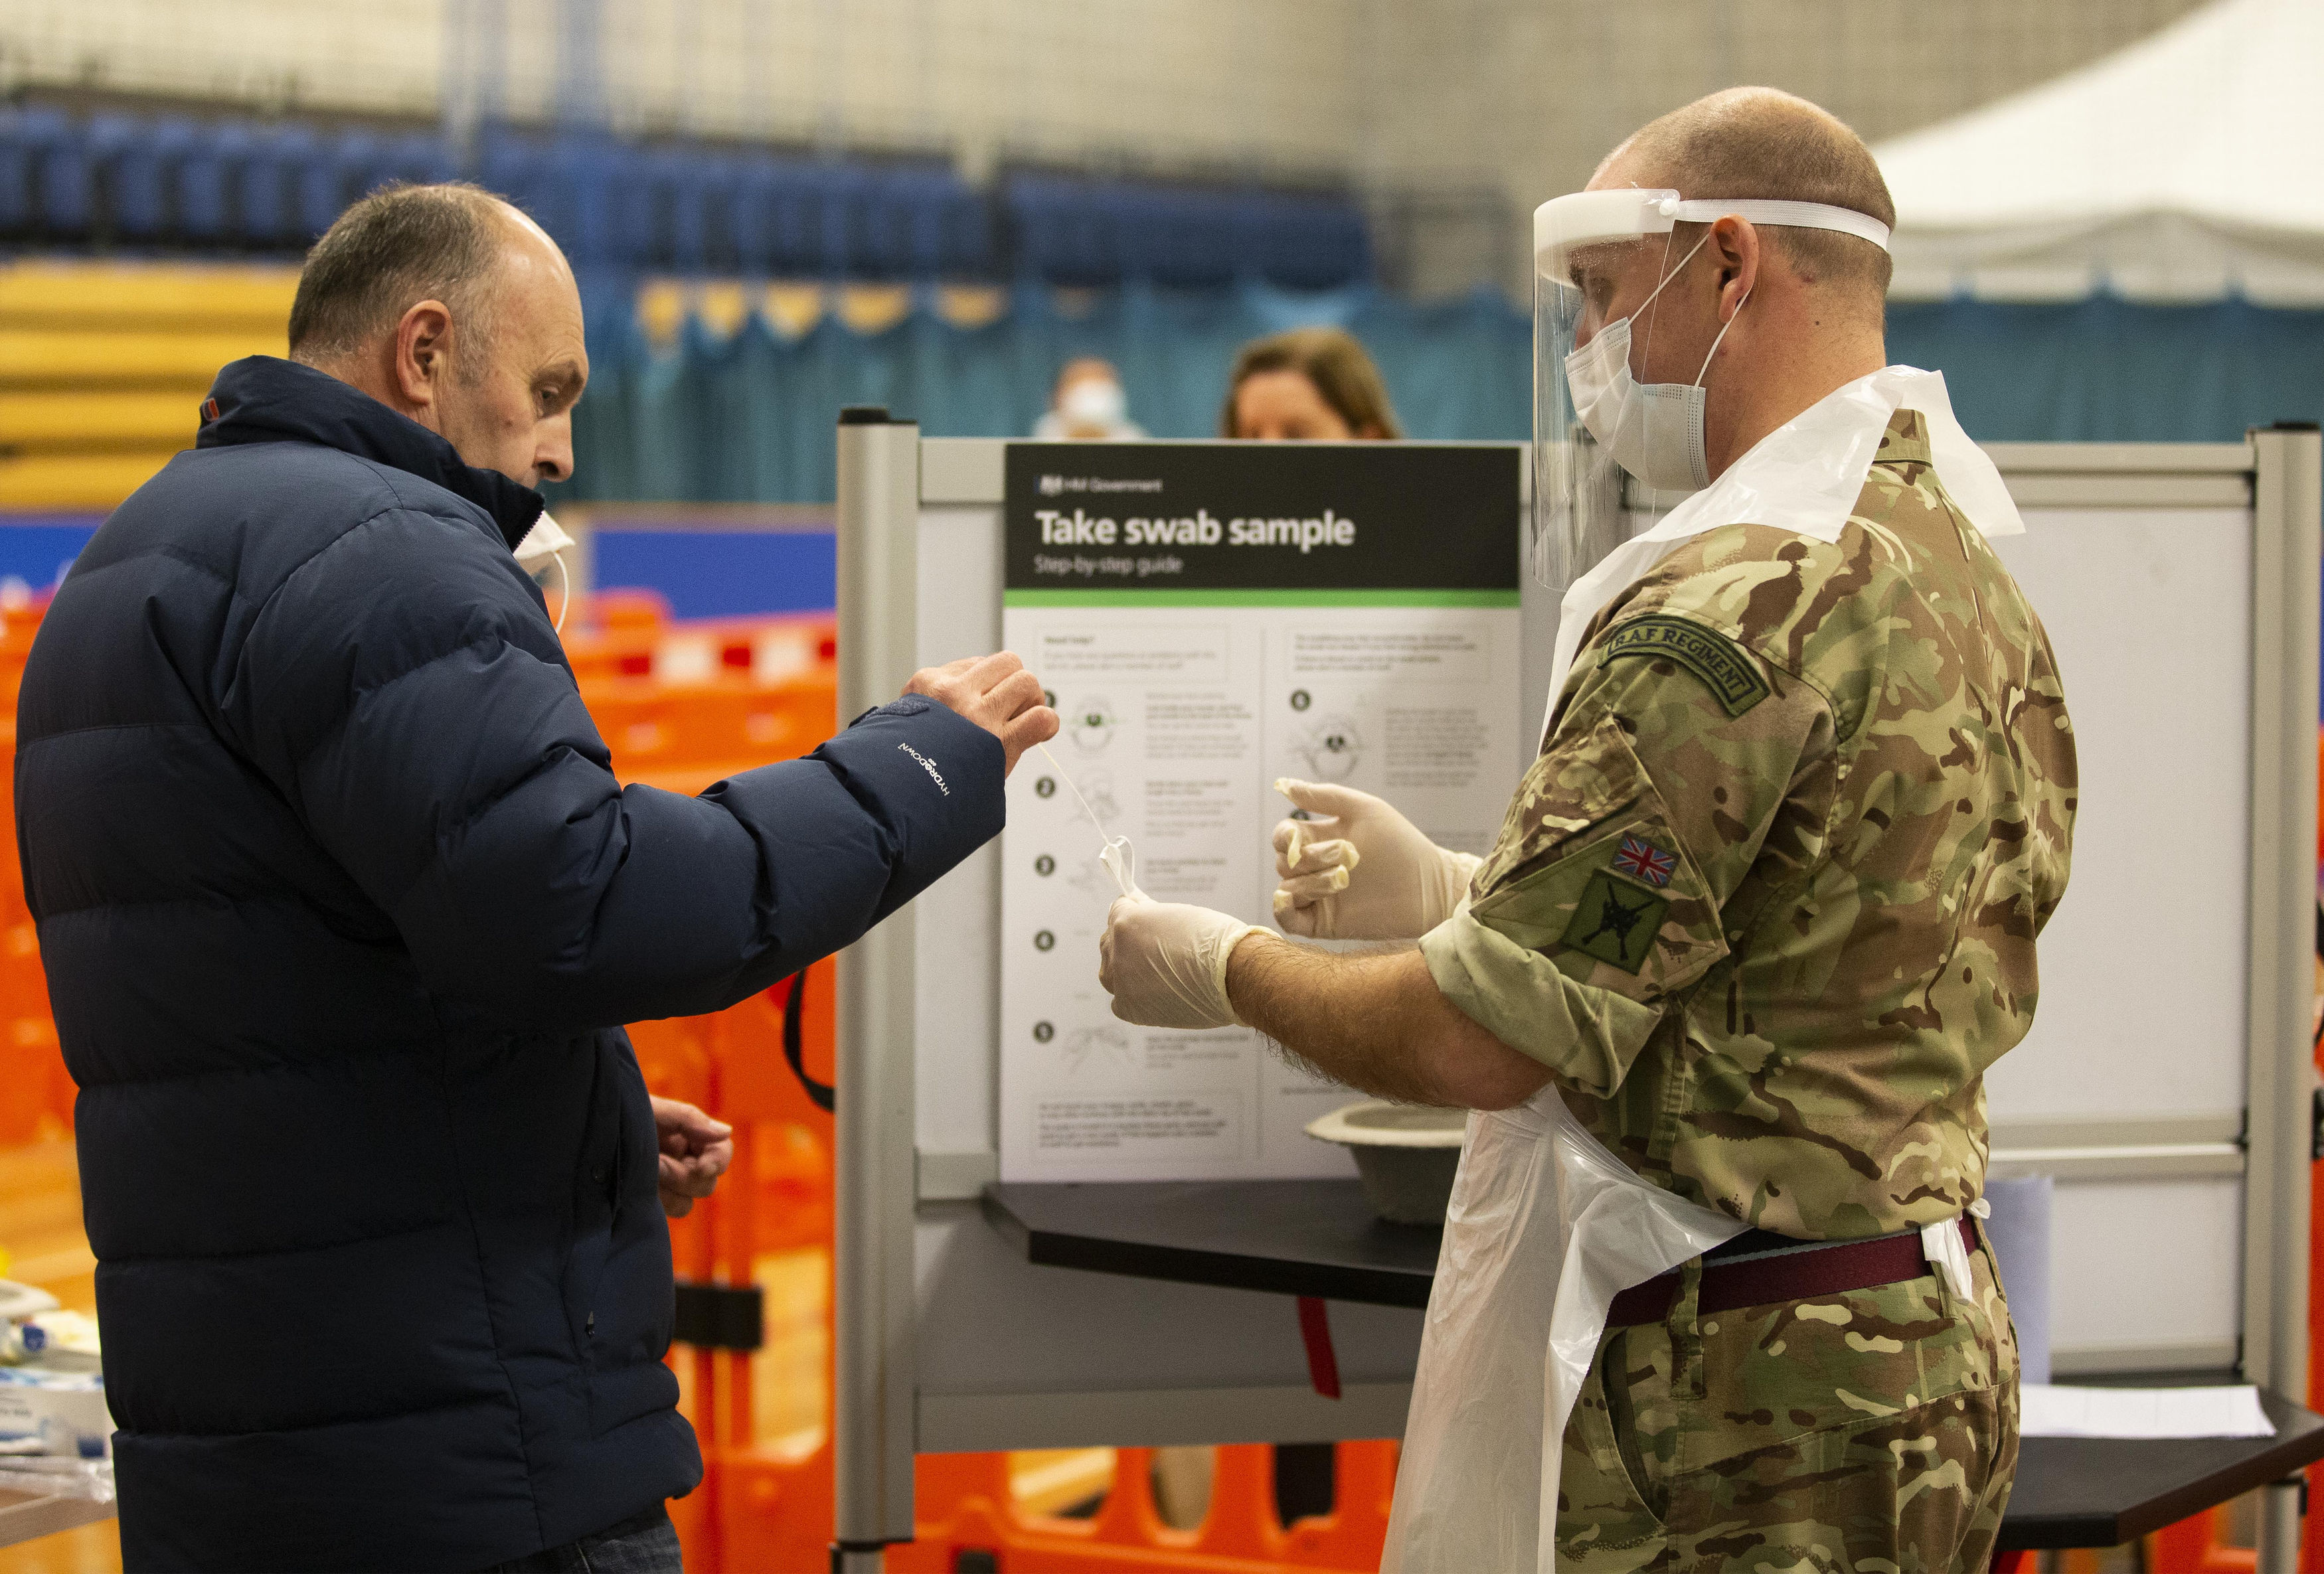 Royal Air Force personnel carrying out coronavirus testing